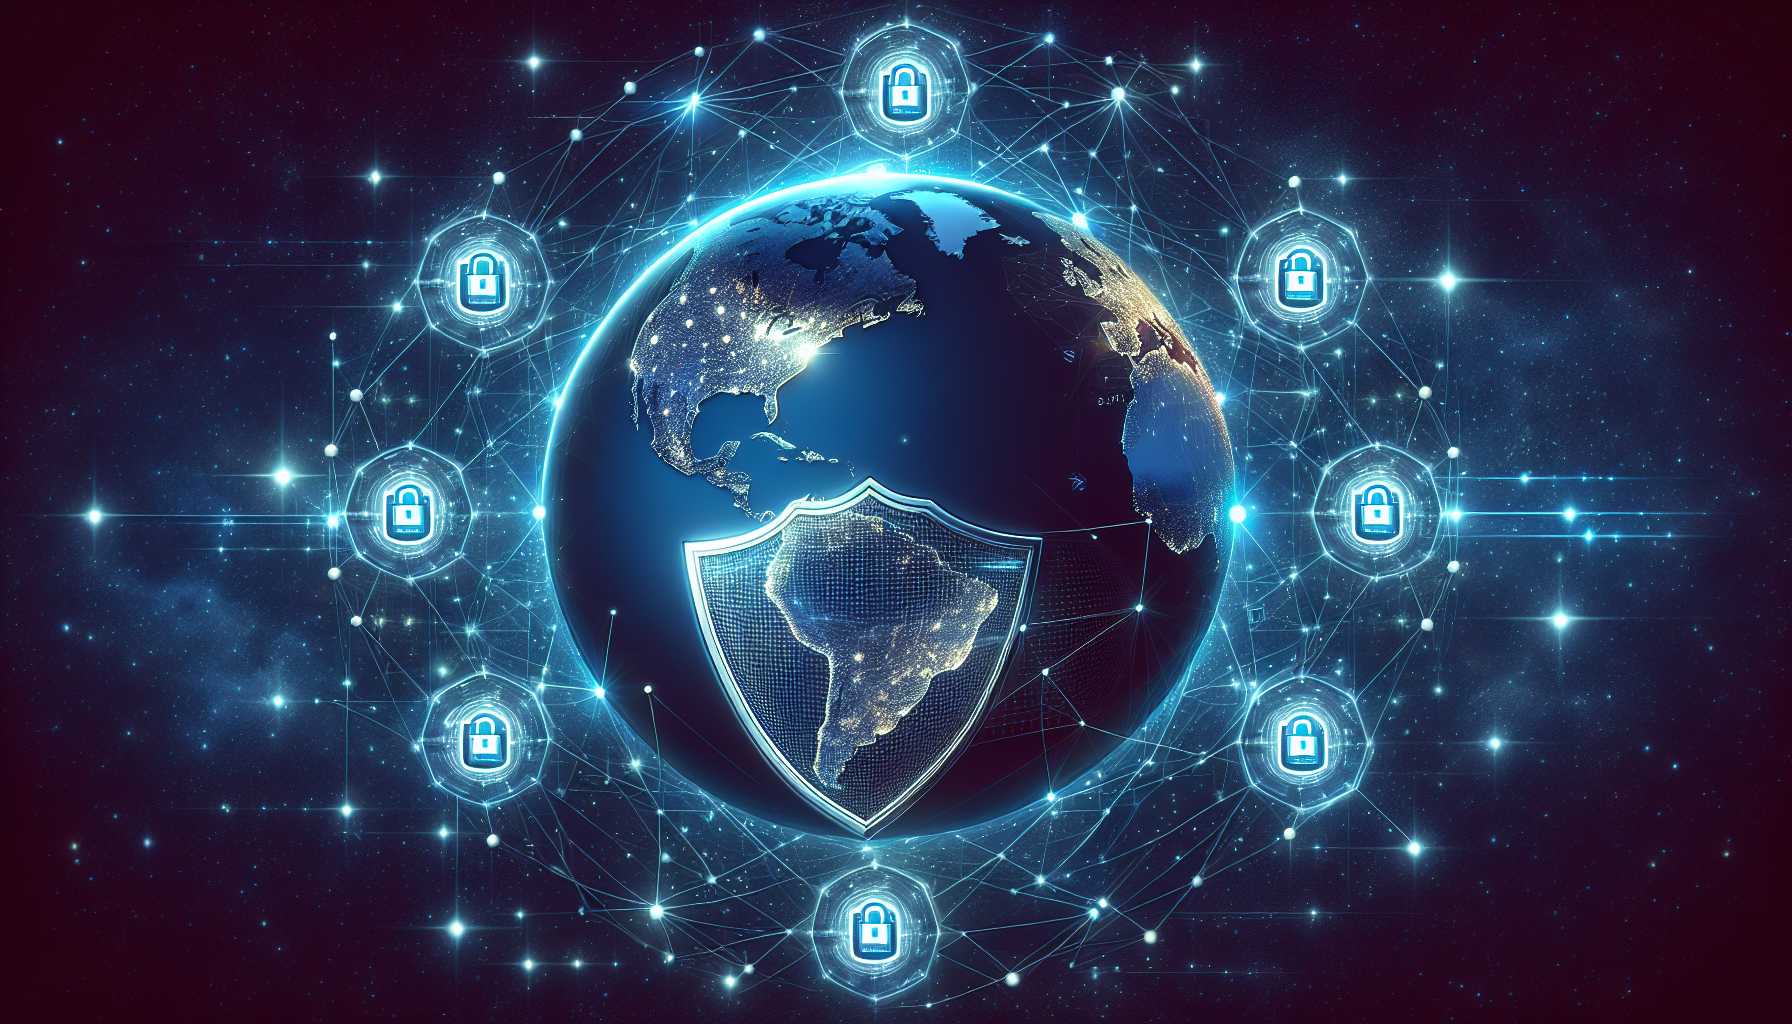 Digital representation of secure VPN connection around the globe